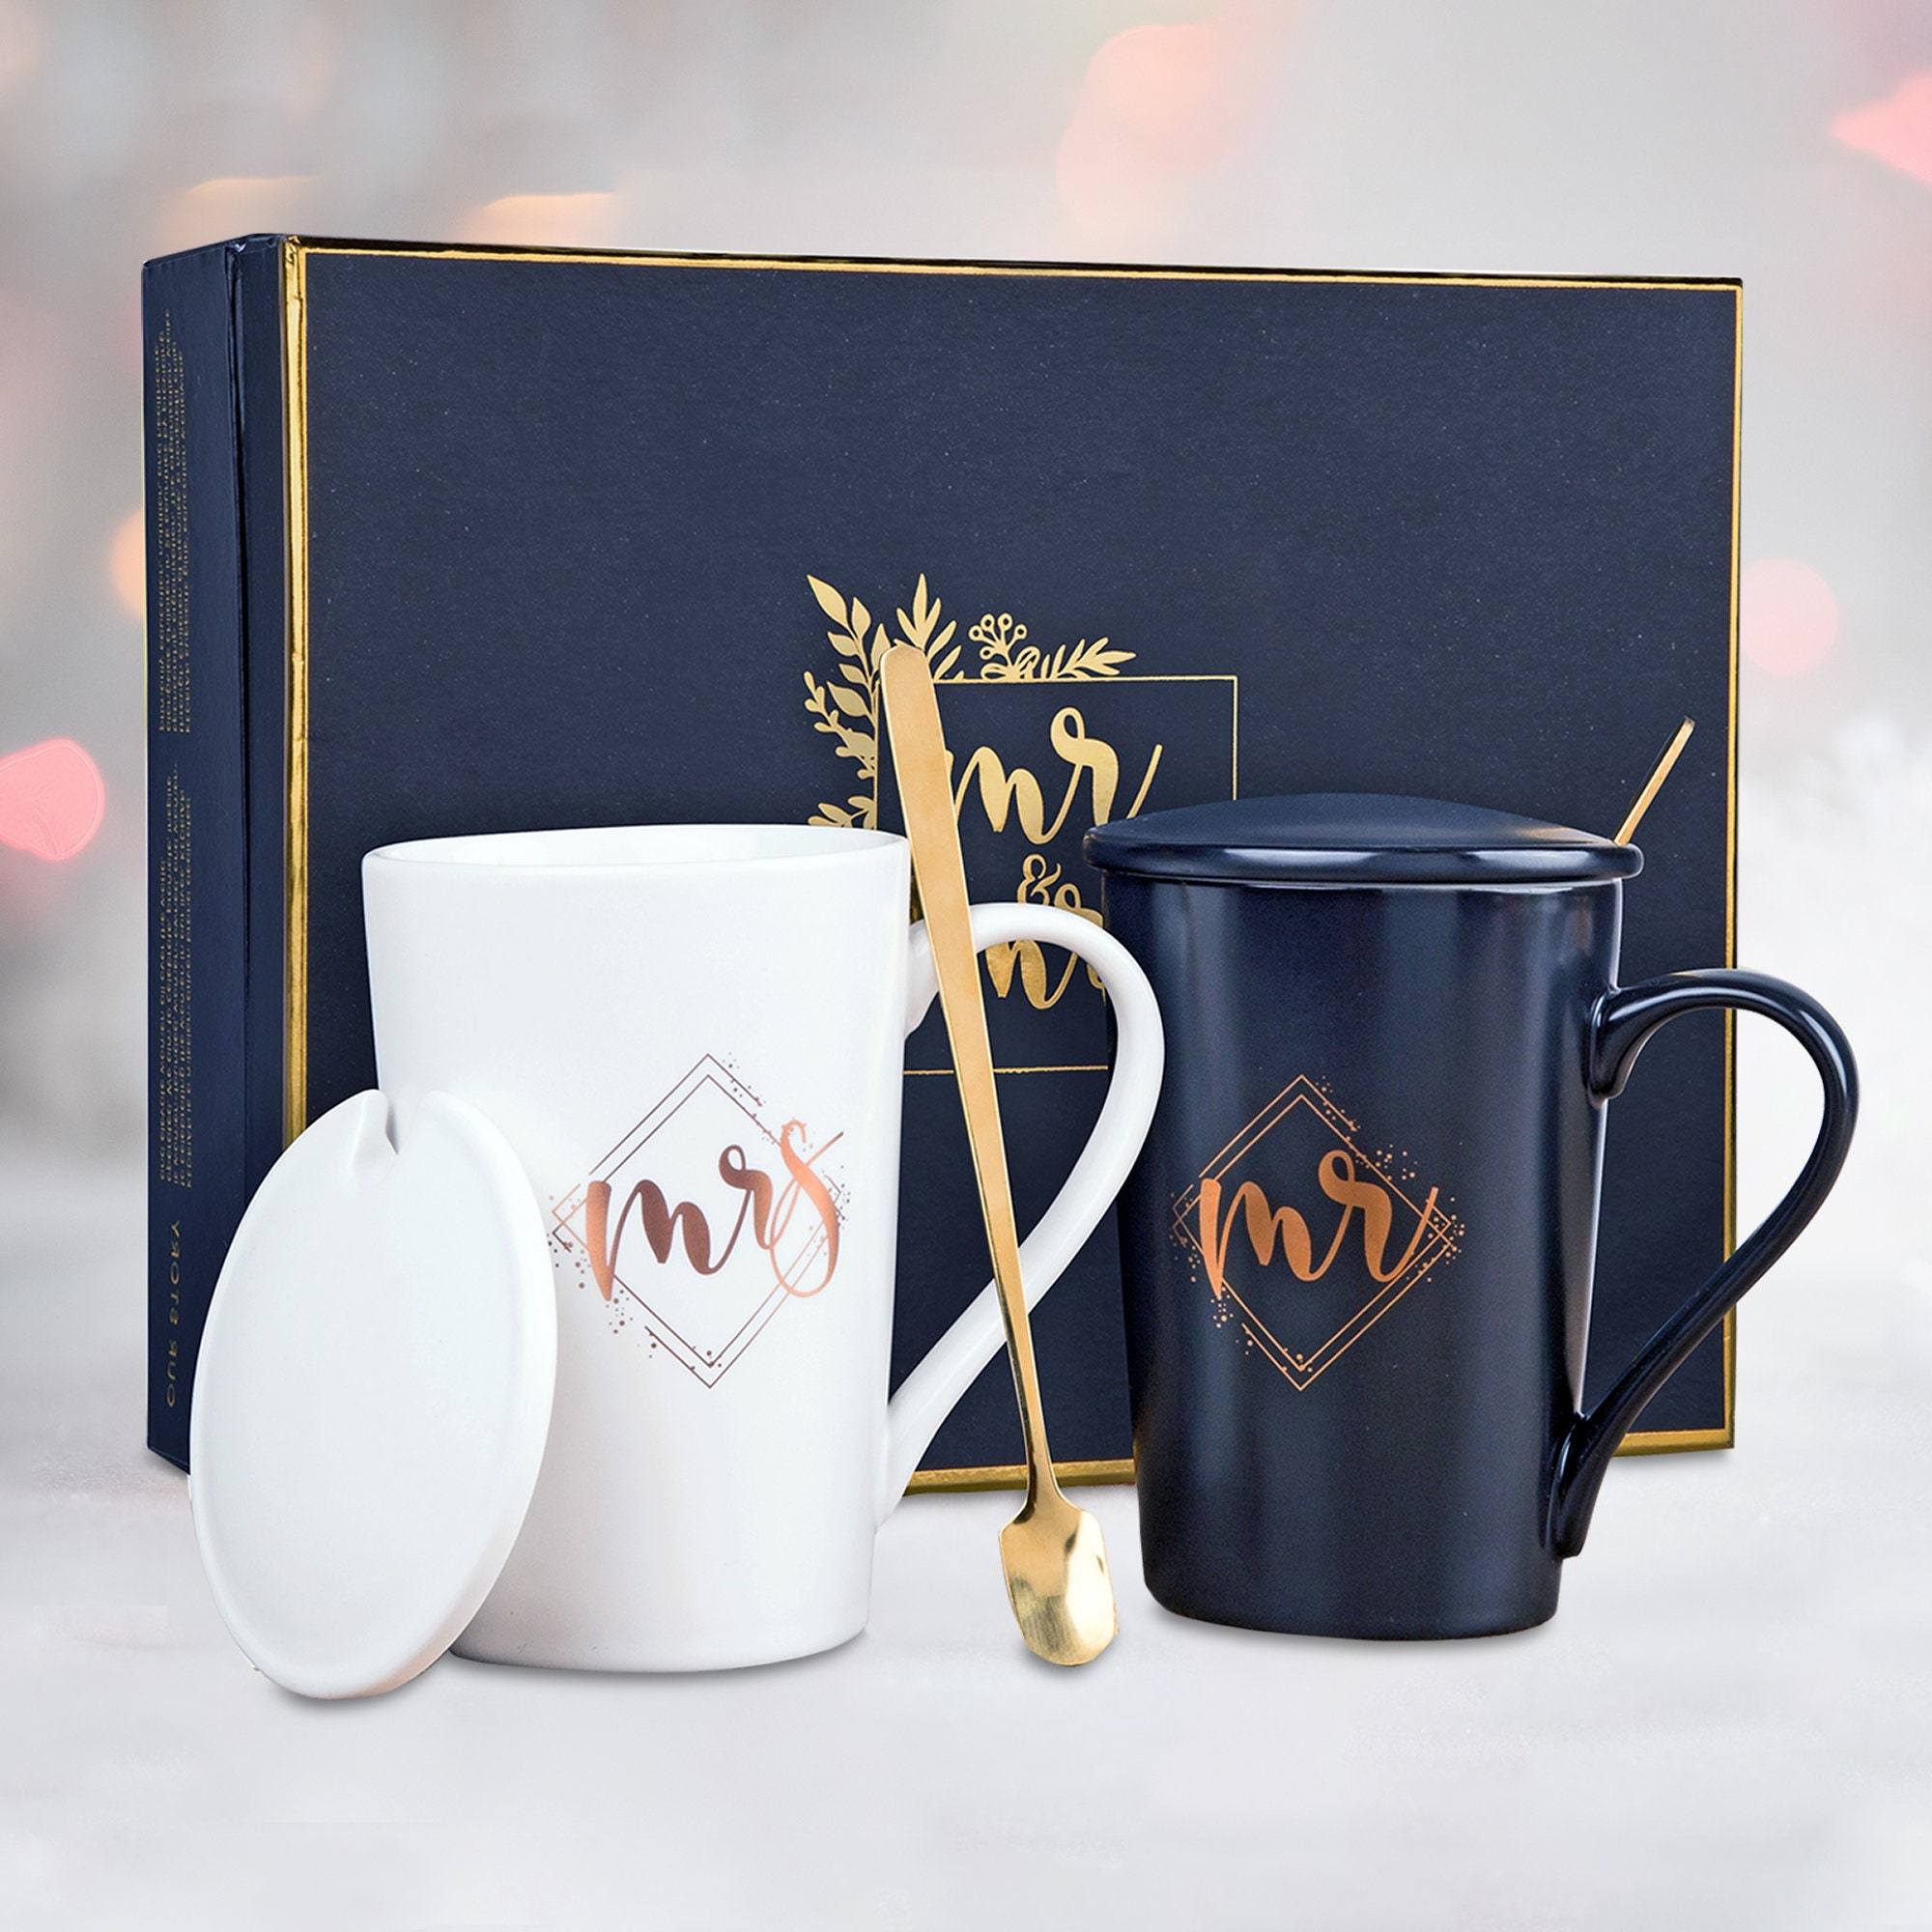 Mr & Mrs Coffee Mugs 2024, Novelty Funny Wedding Gifts Set of 2, Engagement  Gift for Bride Groom His Hers Couples Wife Husband Newlyweds, Prospective